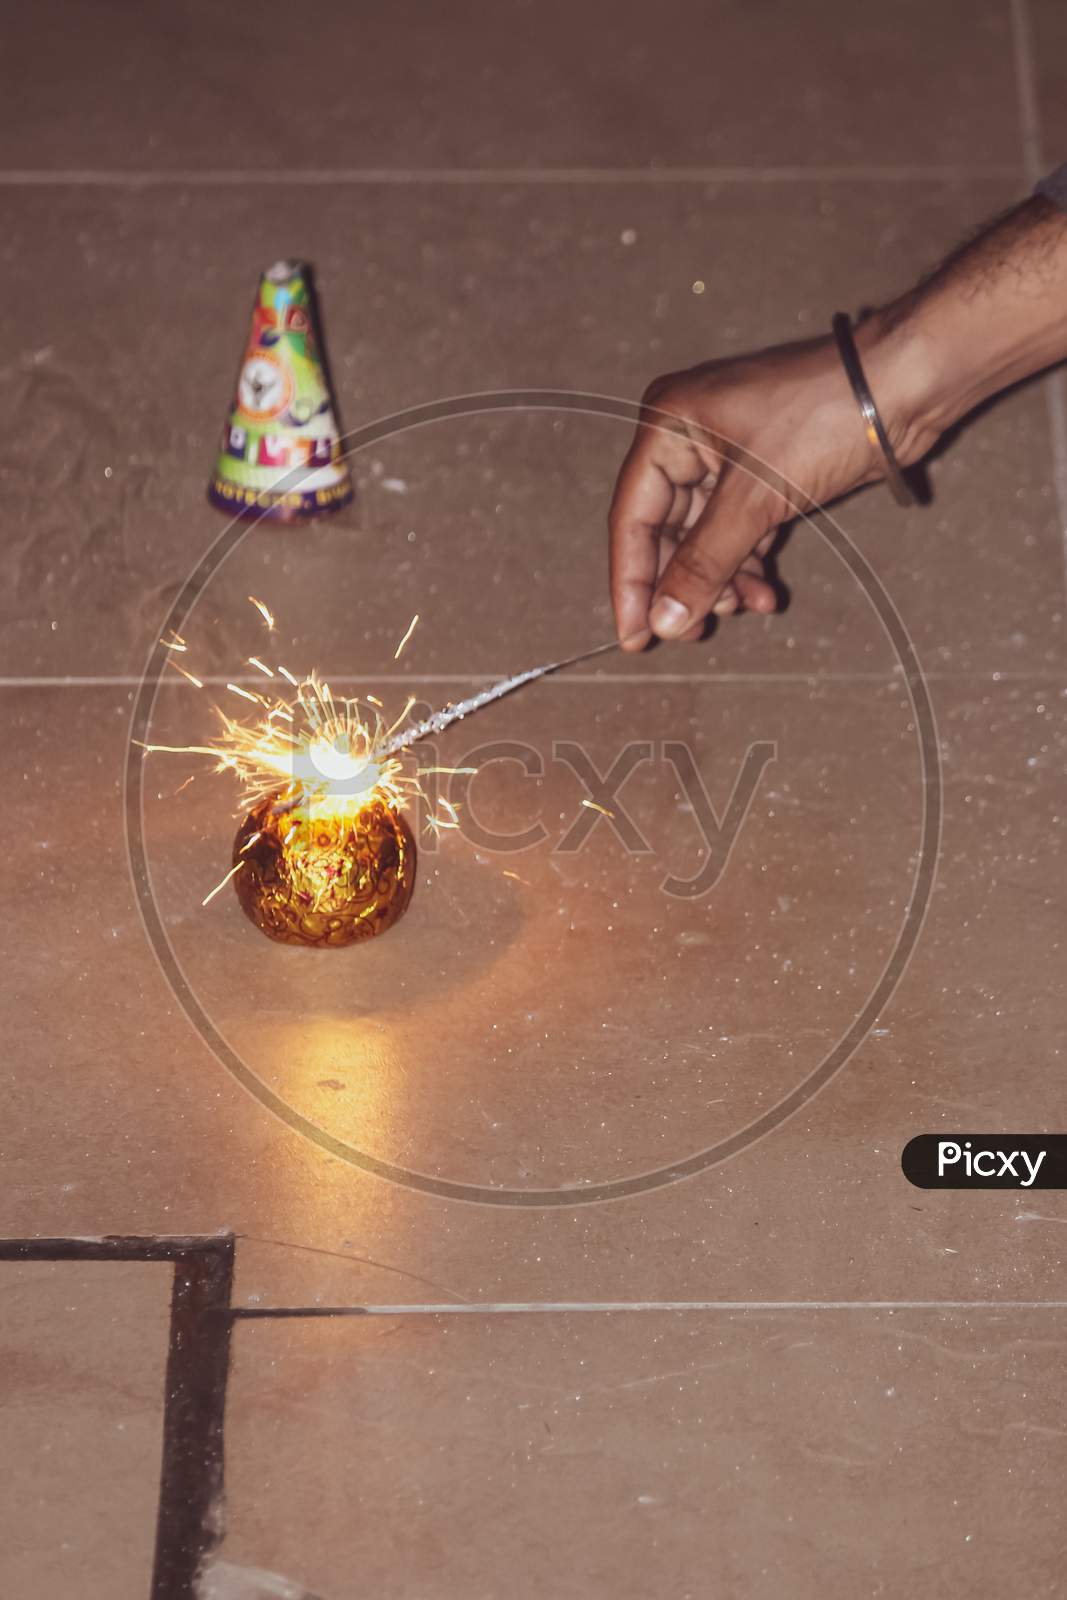 sparks of the fire coming out of the sparkler to burn the crackers during the festivals, celebration, diwali christmas